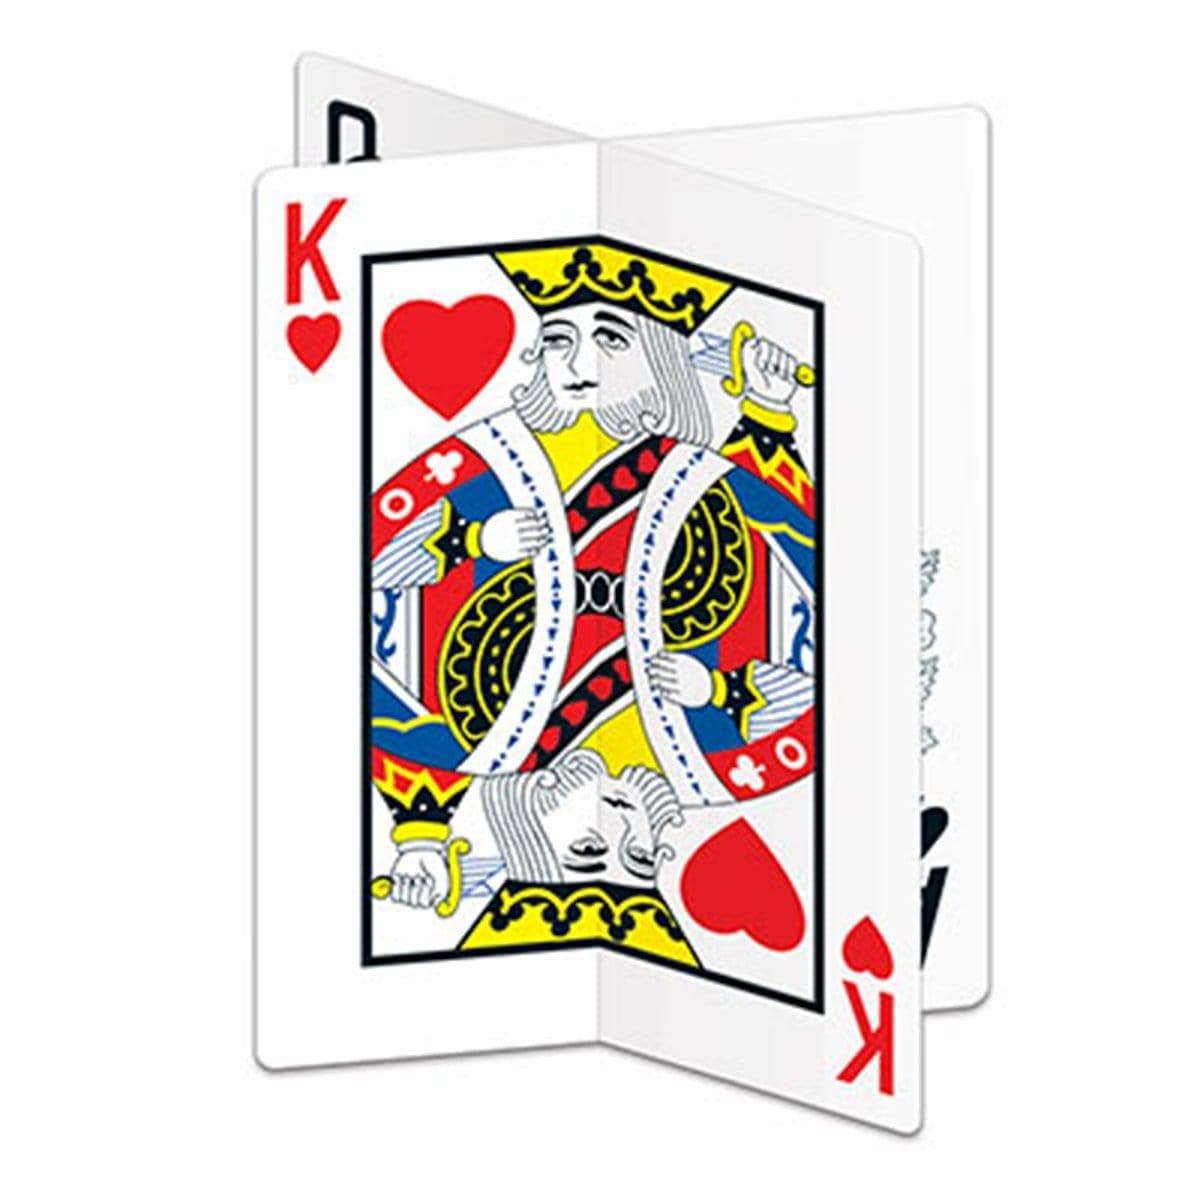 Buy Theme Party 3D Playing Card Centerpiece, 12 Inches sold at Party Expert